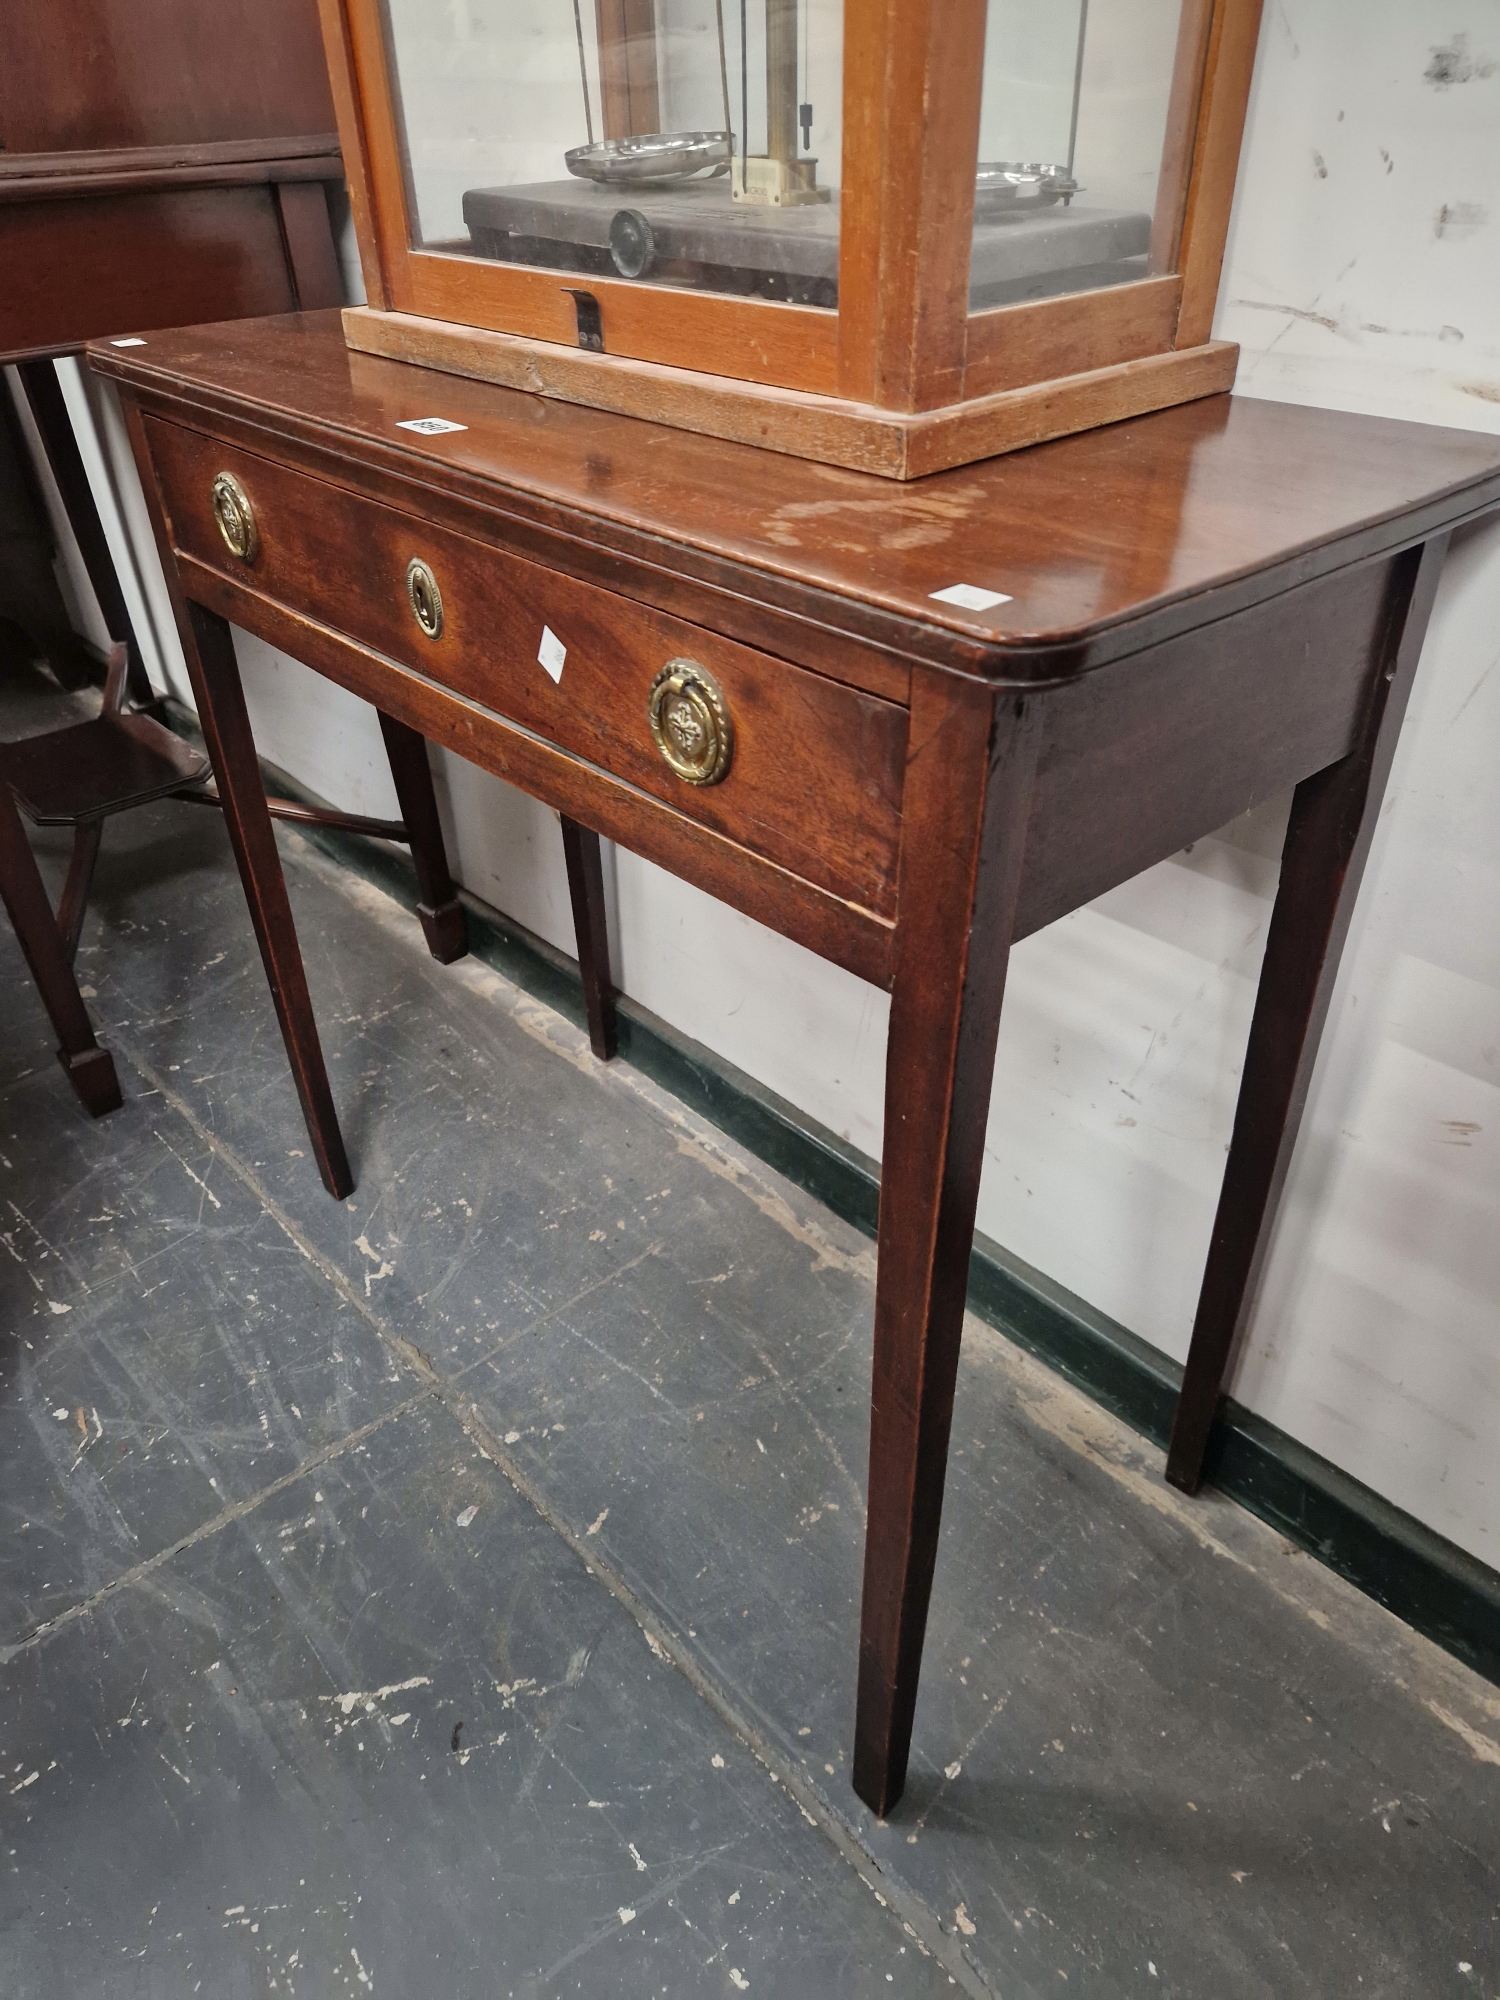 AN EARLY 19th C. MAHOGANY SIDE TABLE WITH A SINGLE DRAWER AND ON TAPERING SQUARE LEGS. W 77 x D 34.5 - Image 2 of 3